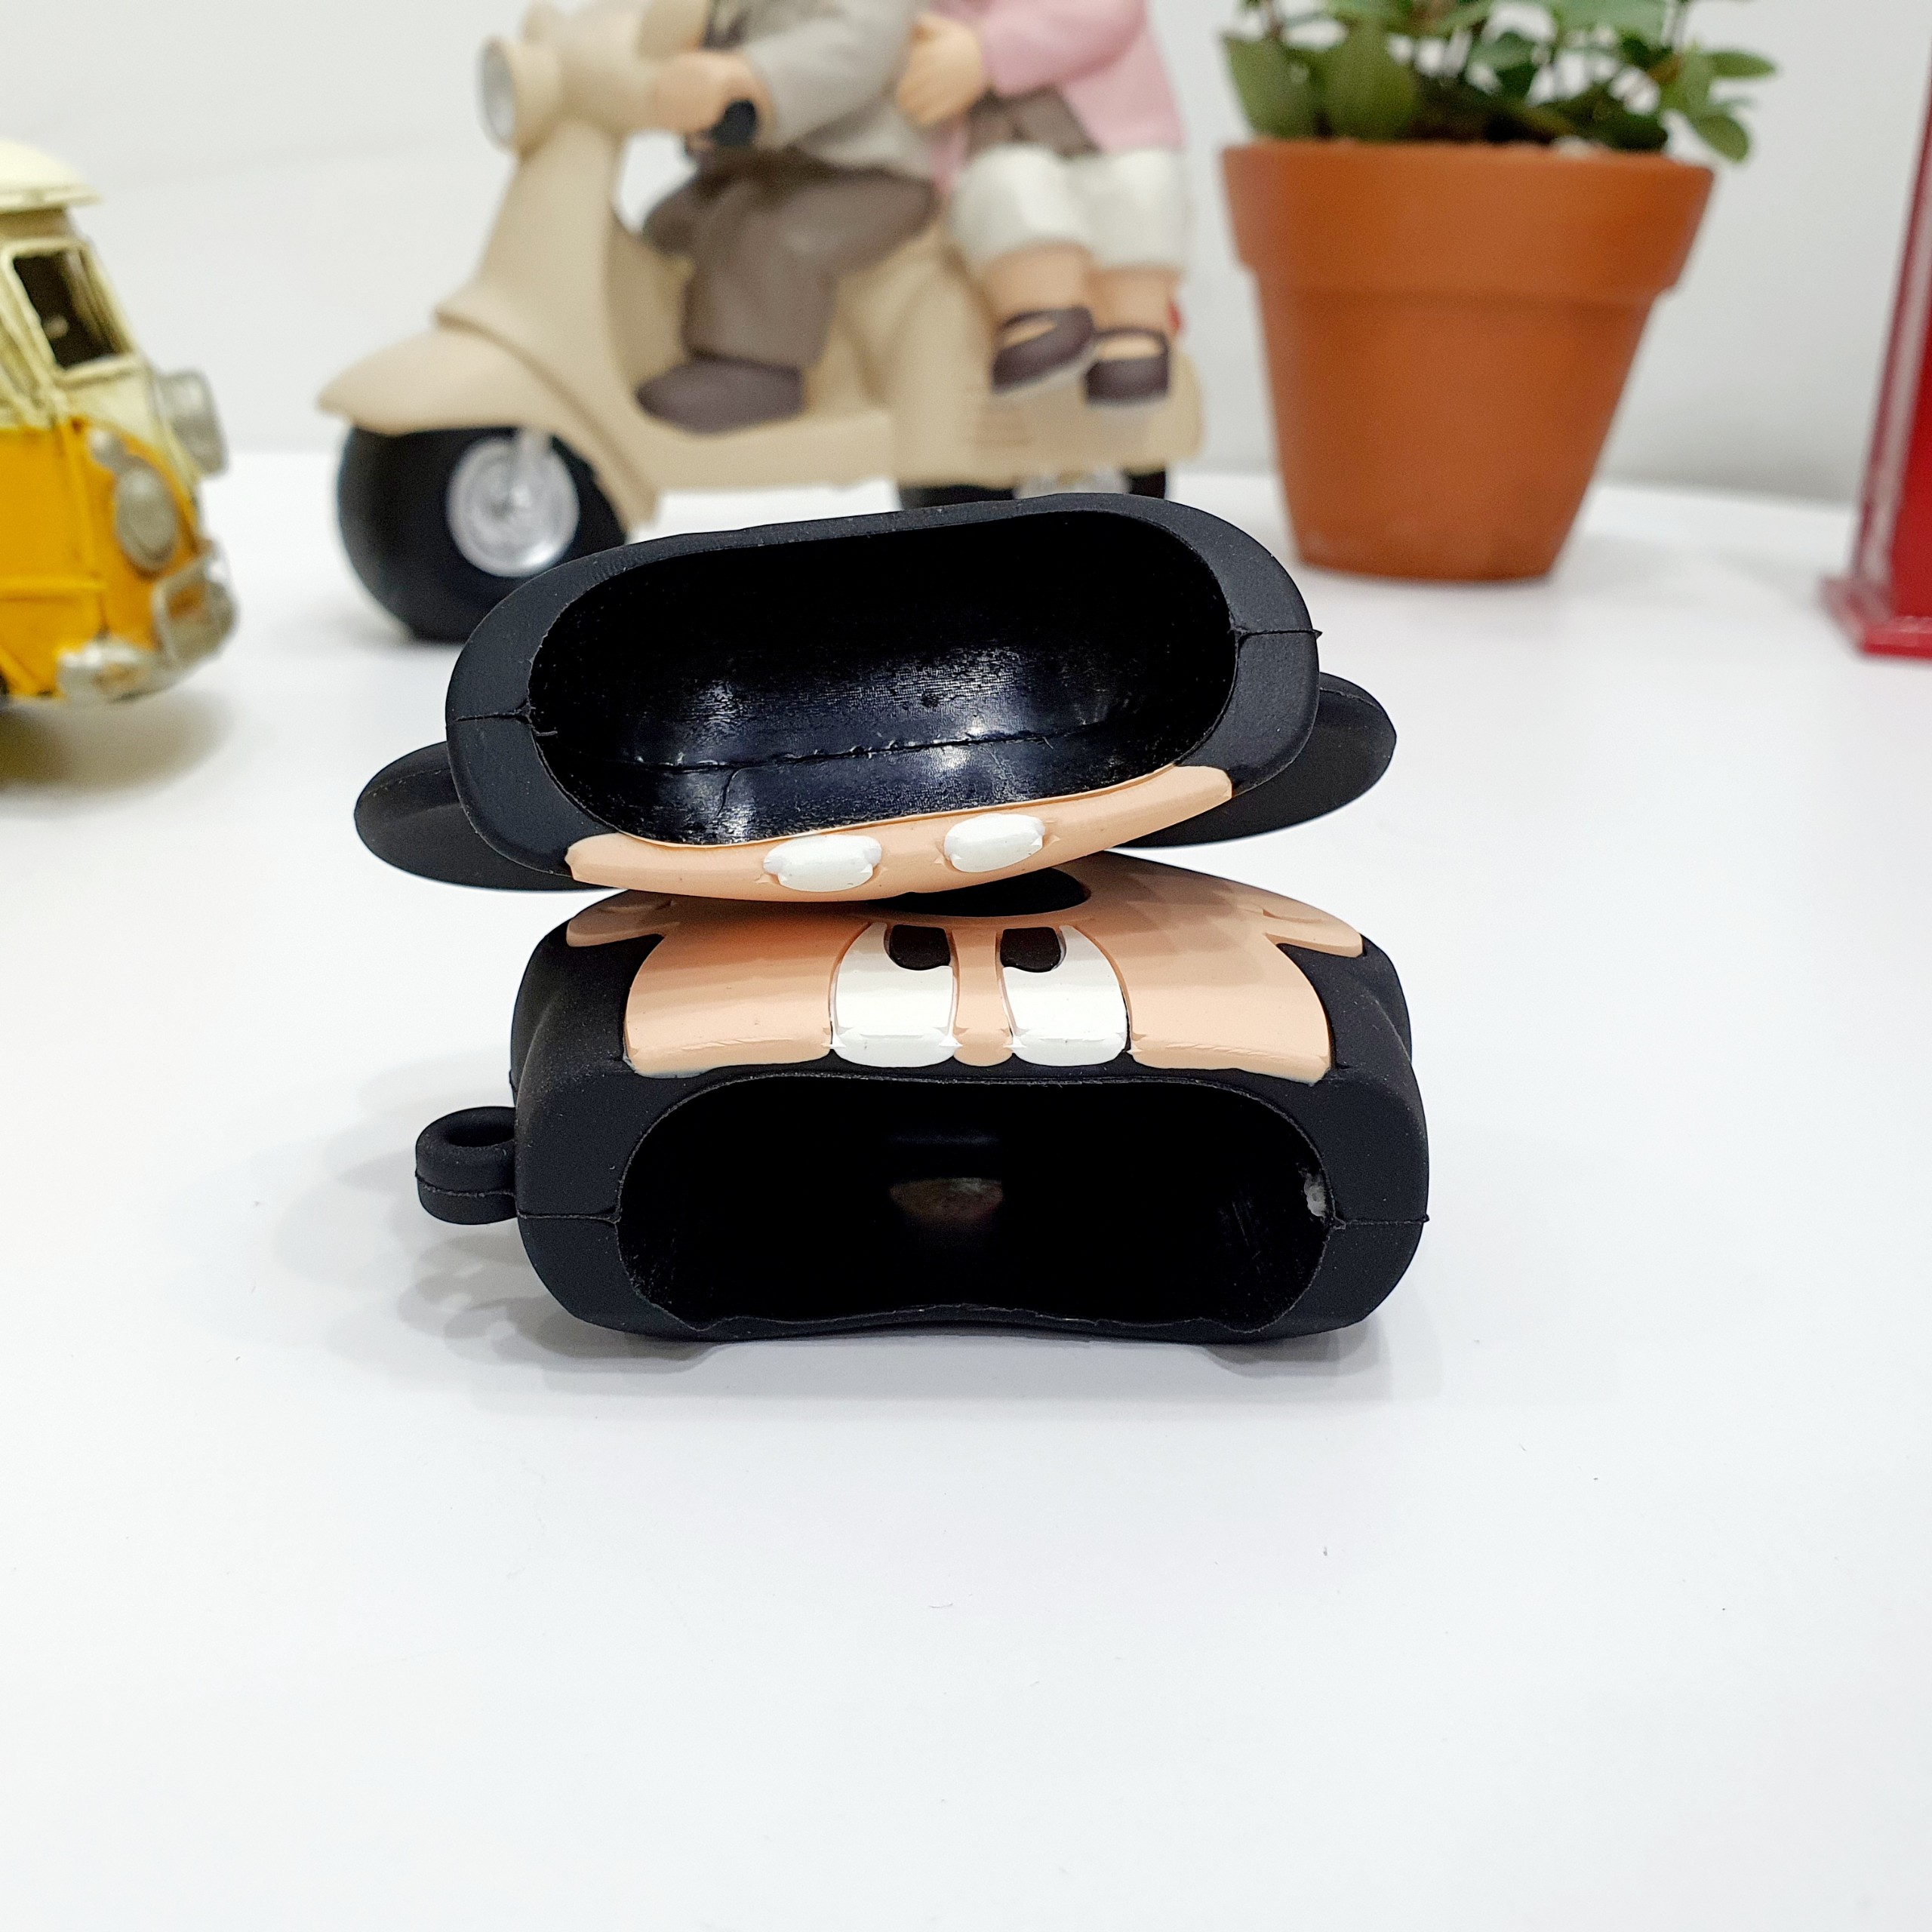 Case Ốp Silicon Bảo Vệ Cho Apple AirPods / AirPods 2 - Chuột Mickey